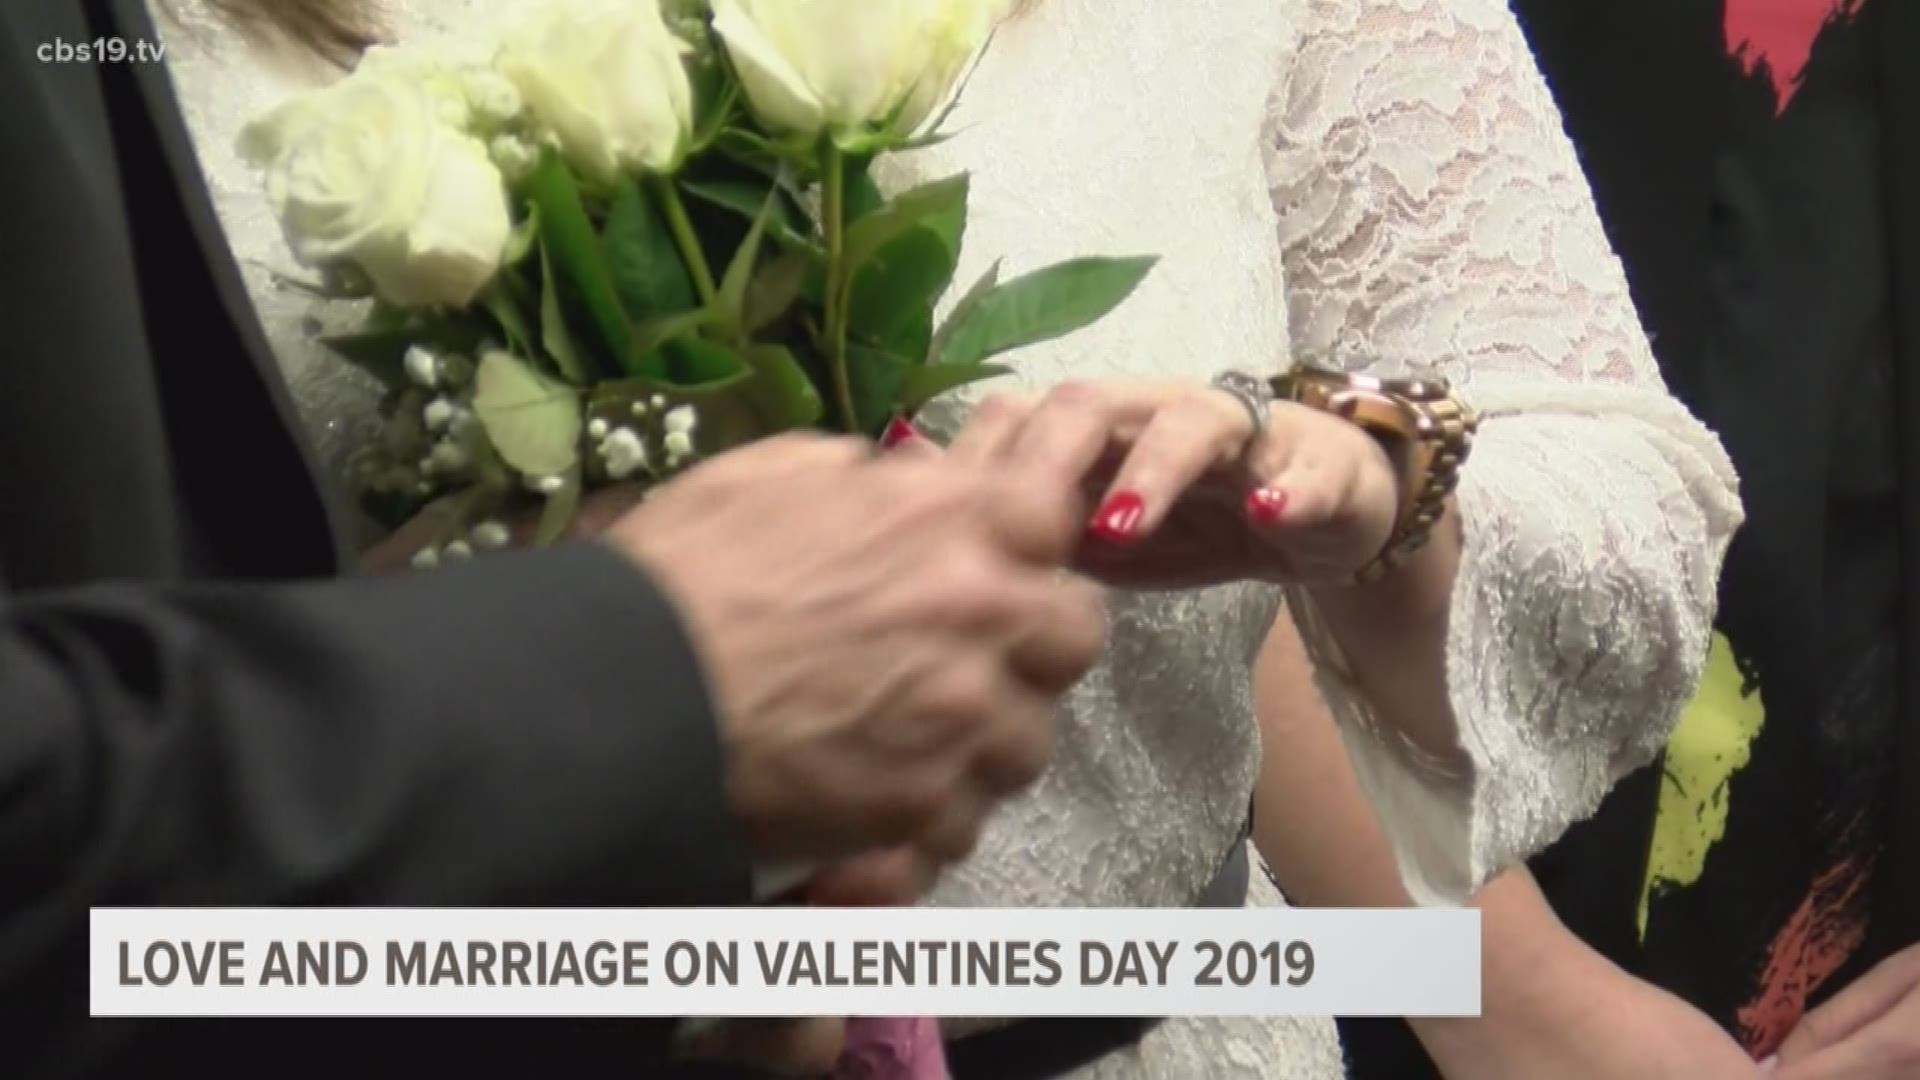 An ETX couple shared their special day with CBS19 as they jumped the broom on Valentine's Day 2019.